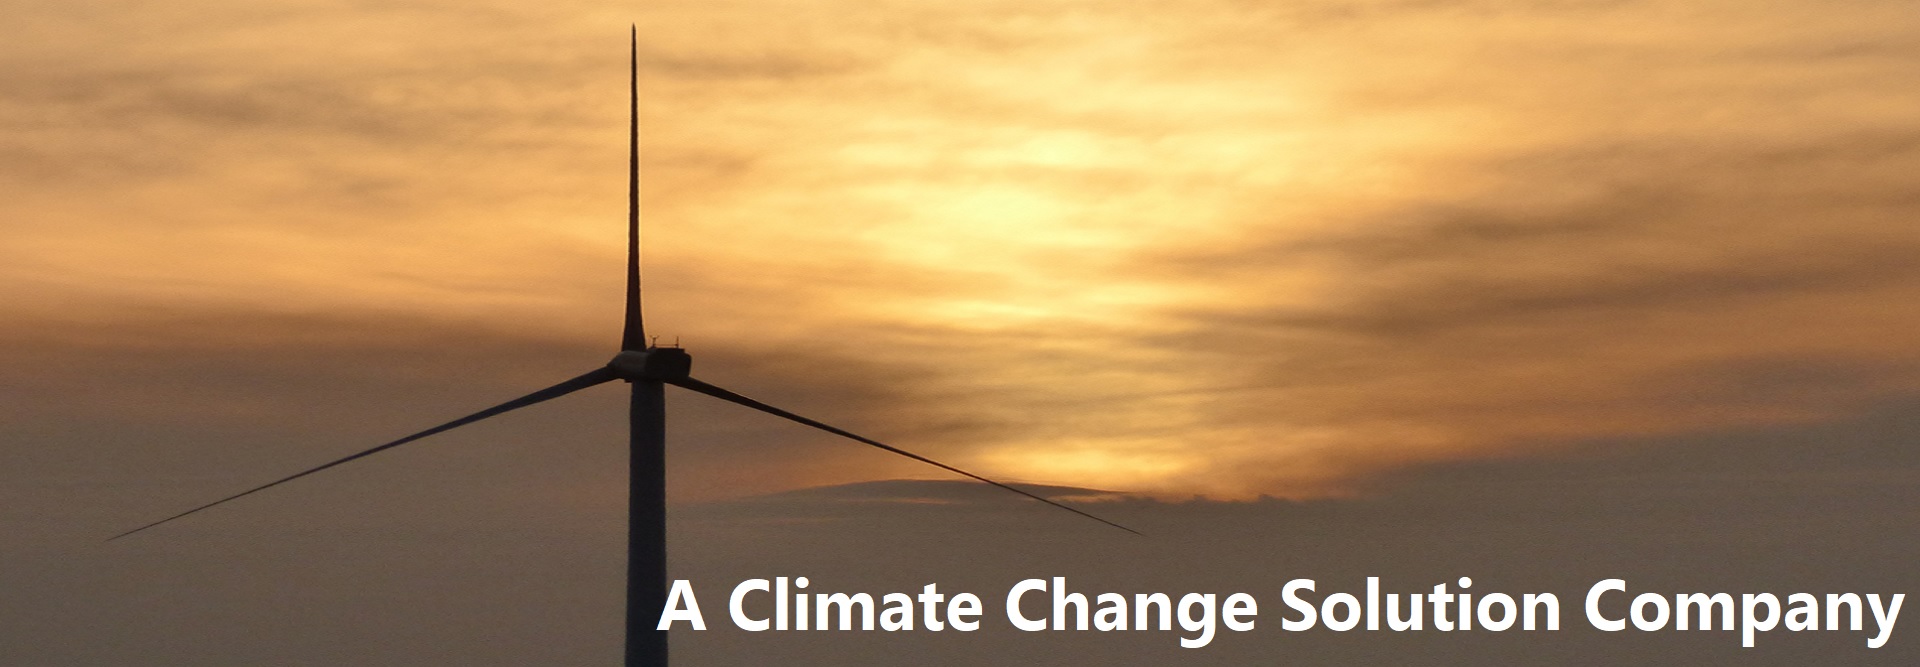 A Climate Change Solution Company